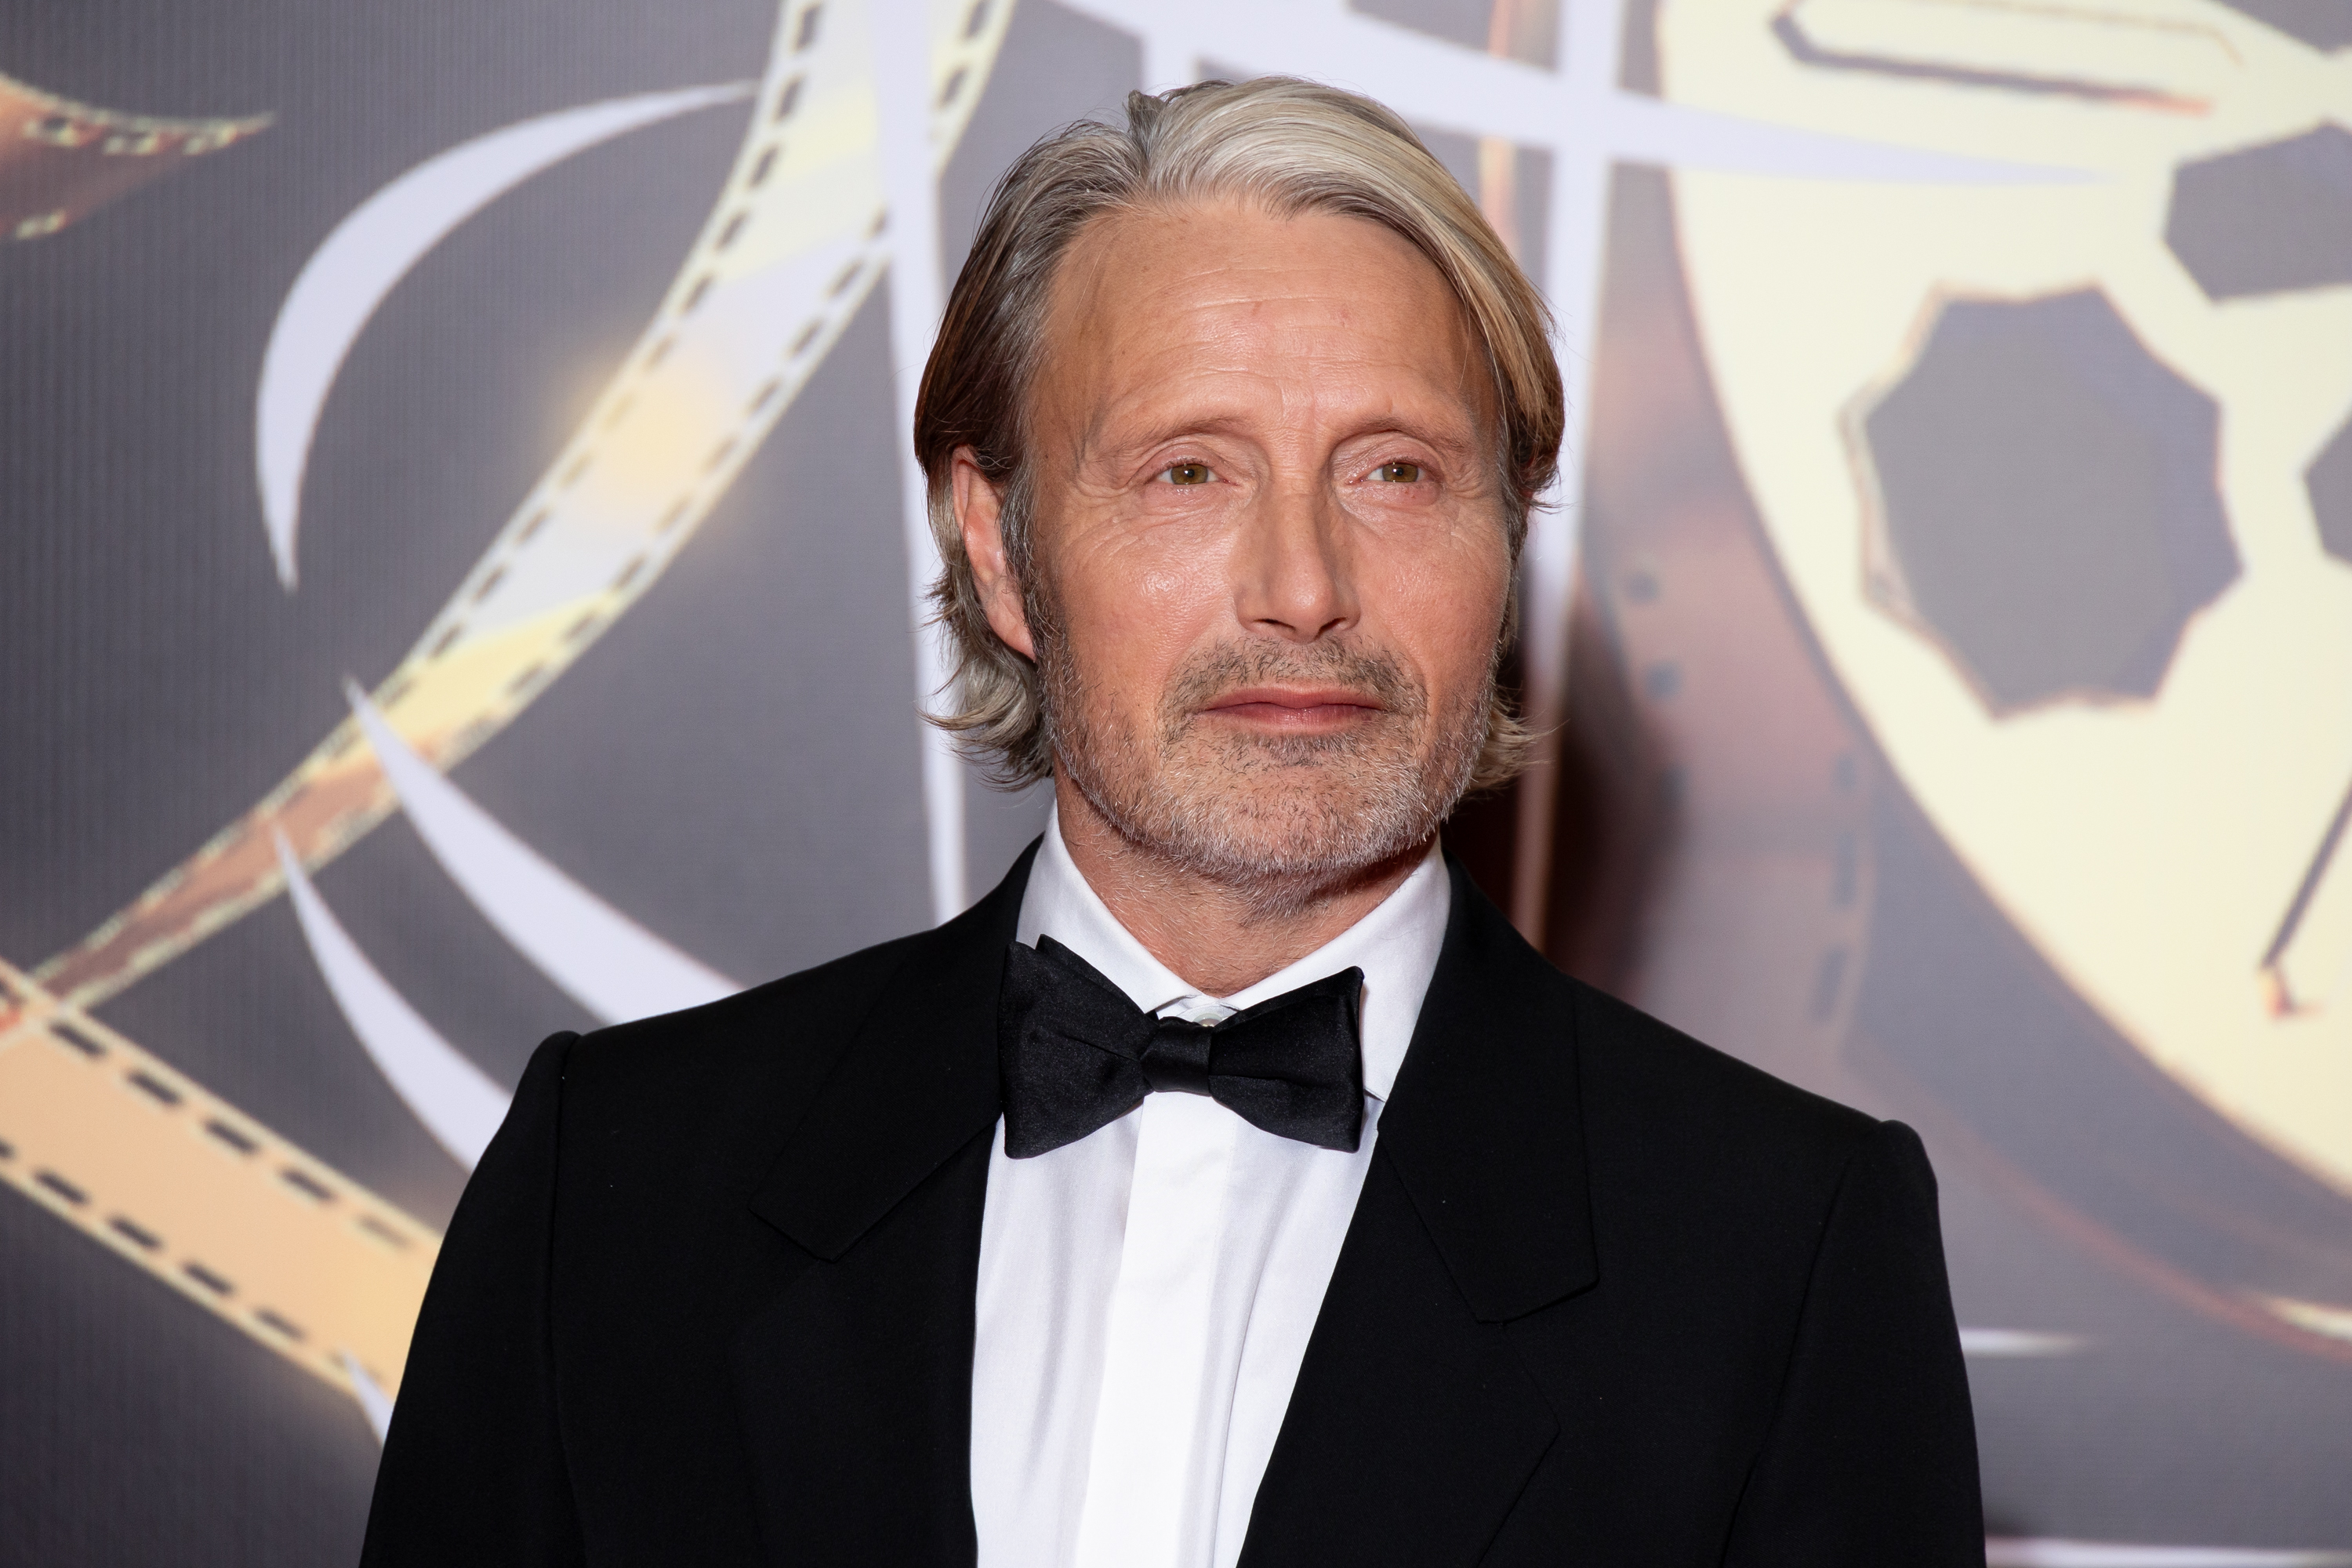 Mads at a media event in a tuxedo